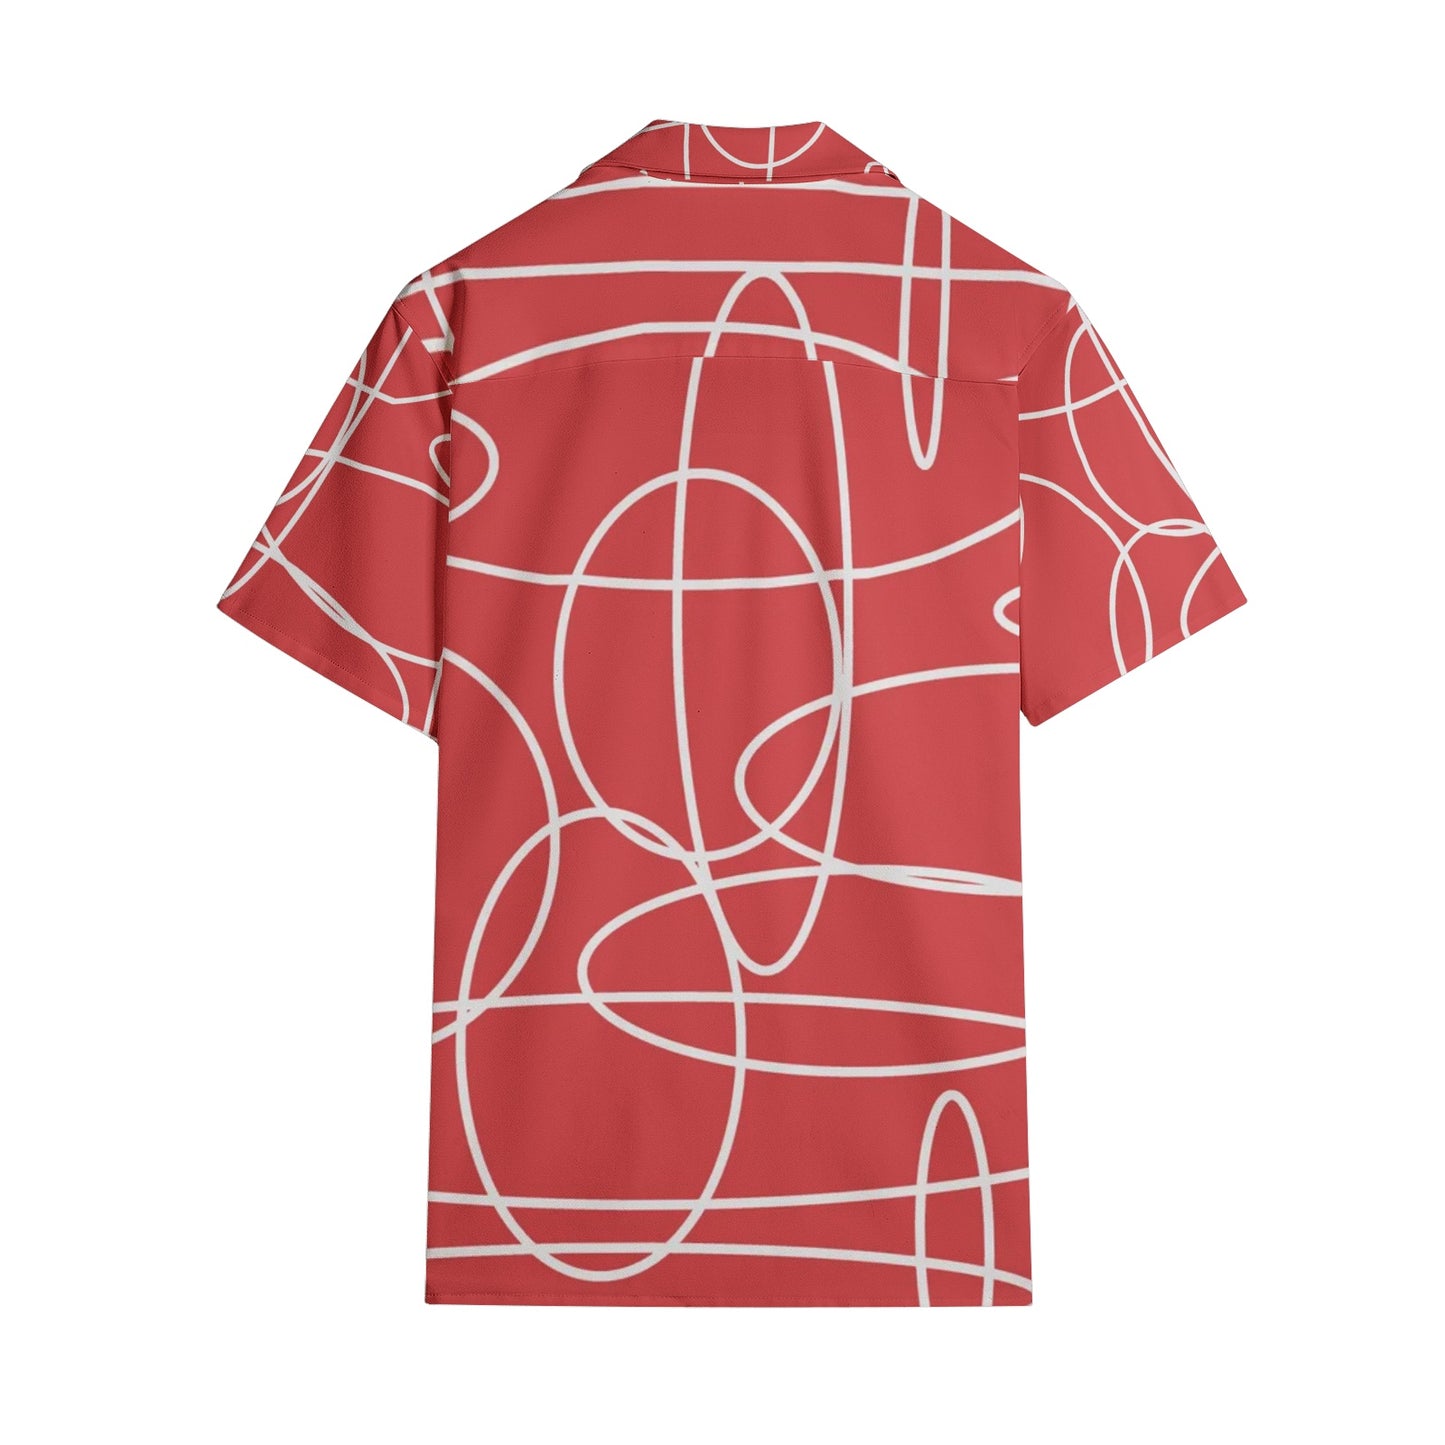 Abstract Men's Short Sleeve Shirts - O By Onica Online Store